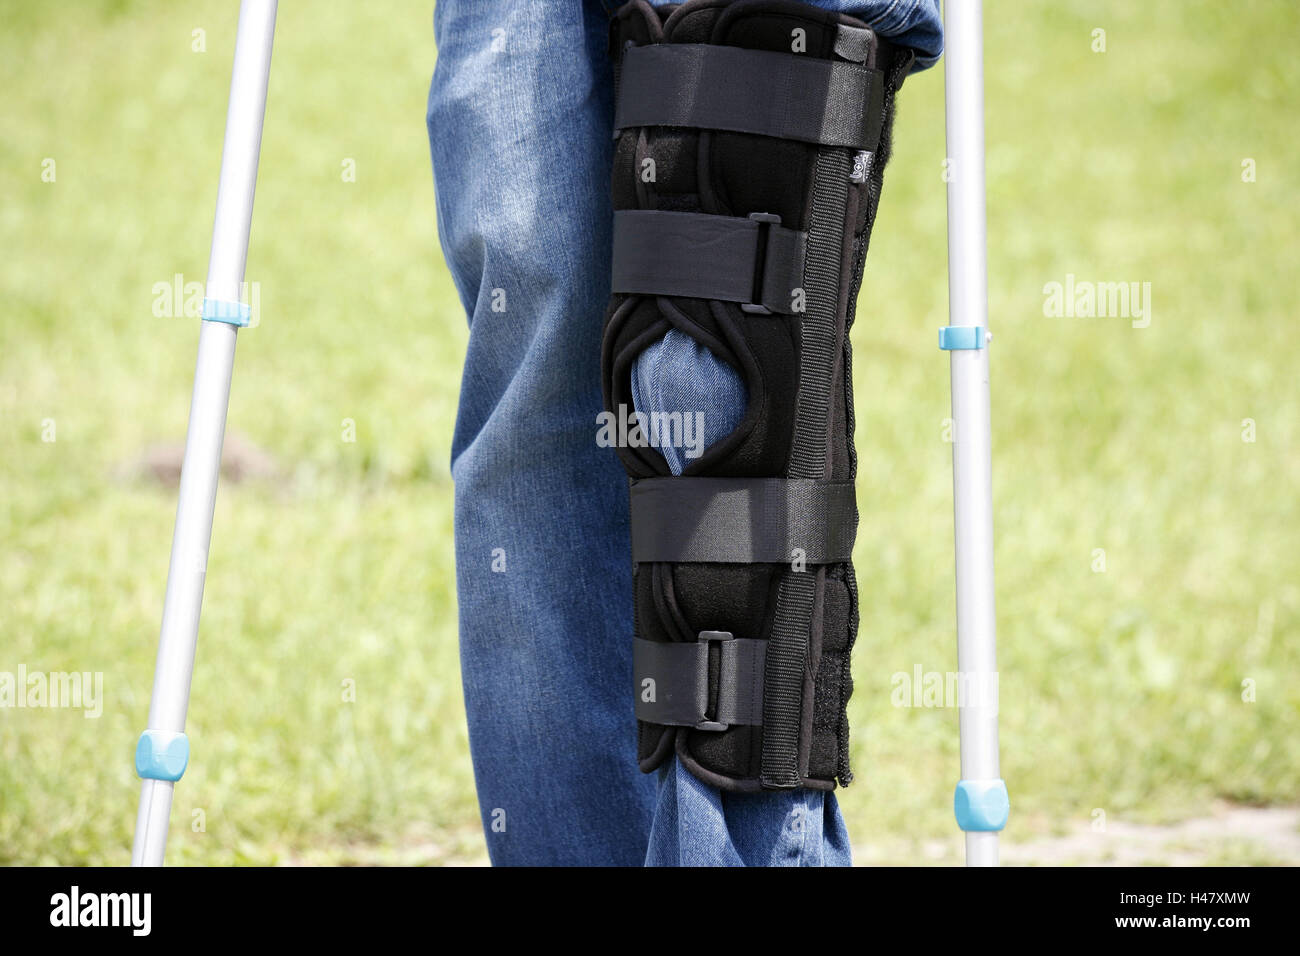 Person, detail, feet, knees, injury, crutches, rail, knee injury, trousers, jeans, bandage, knee prop, bone prop, black, accident, impediment, unwieldy, danger, insurance, encroachment, walking impediment, healing, accessory, person, Stock Photo